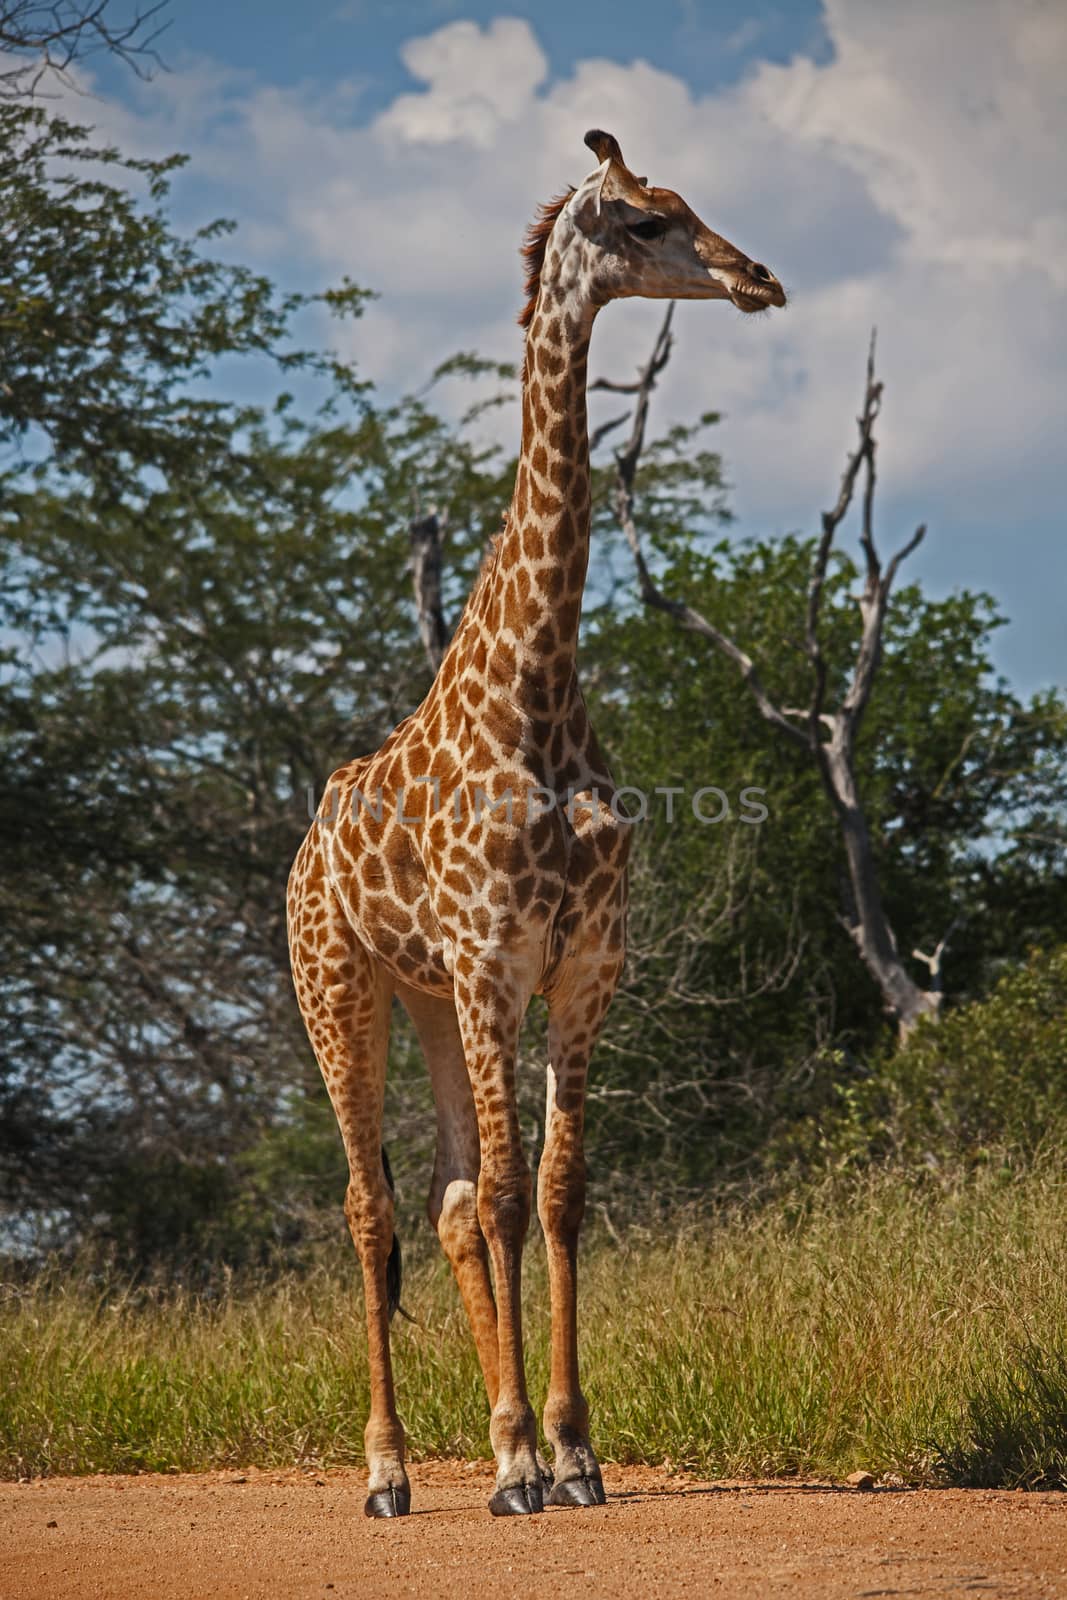 A solitary Giraffe (Giraffa camelopardalis) photographed in Kruger National Park, South Africa